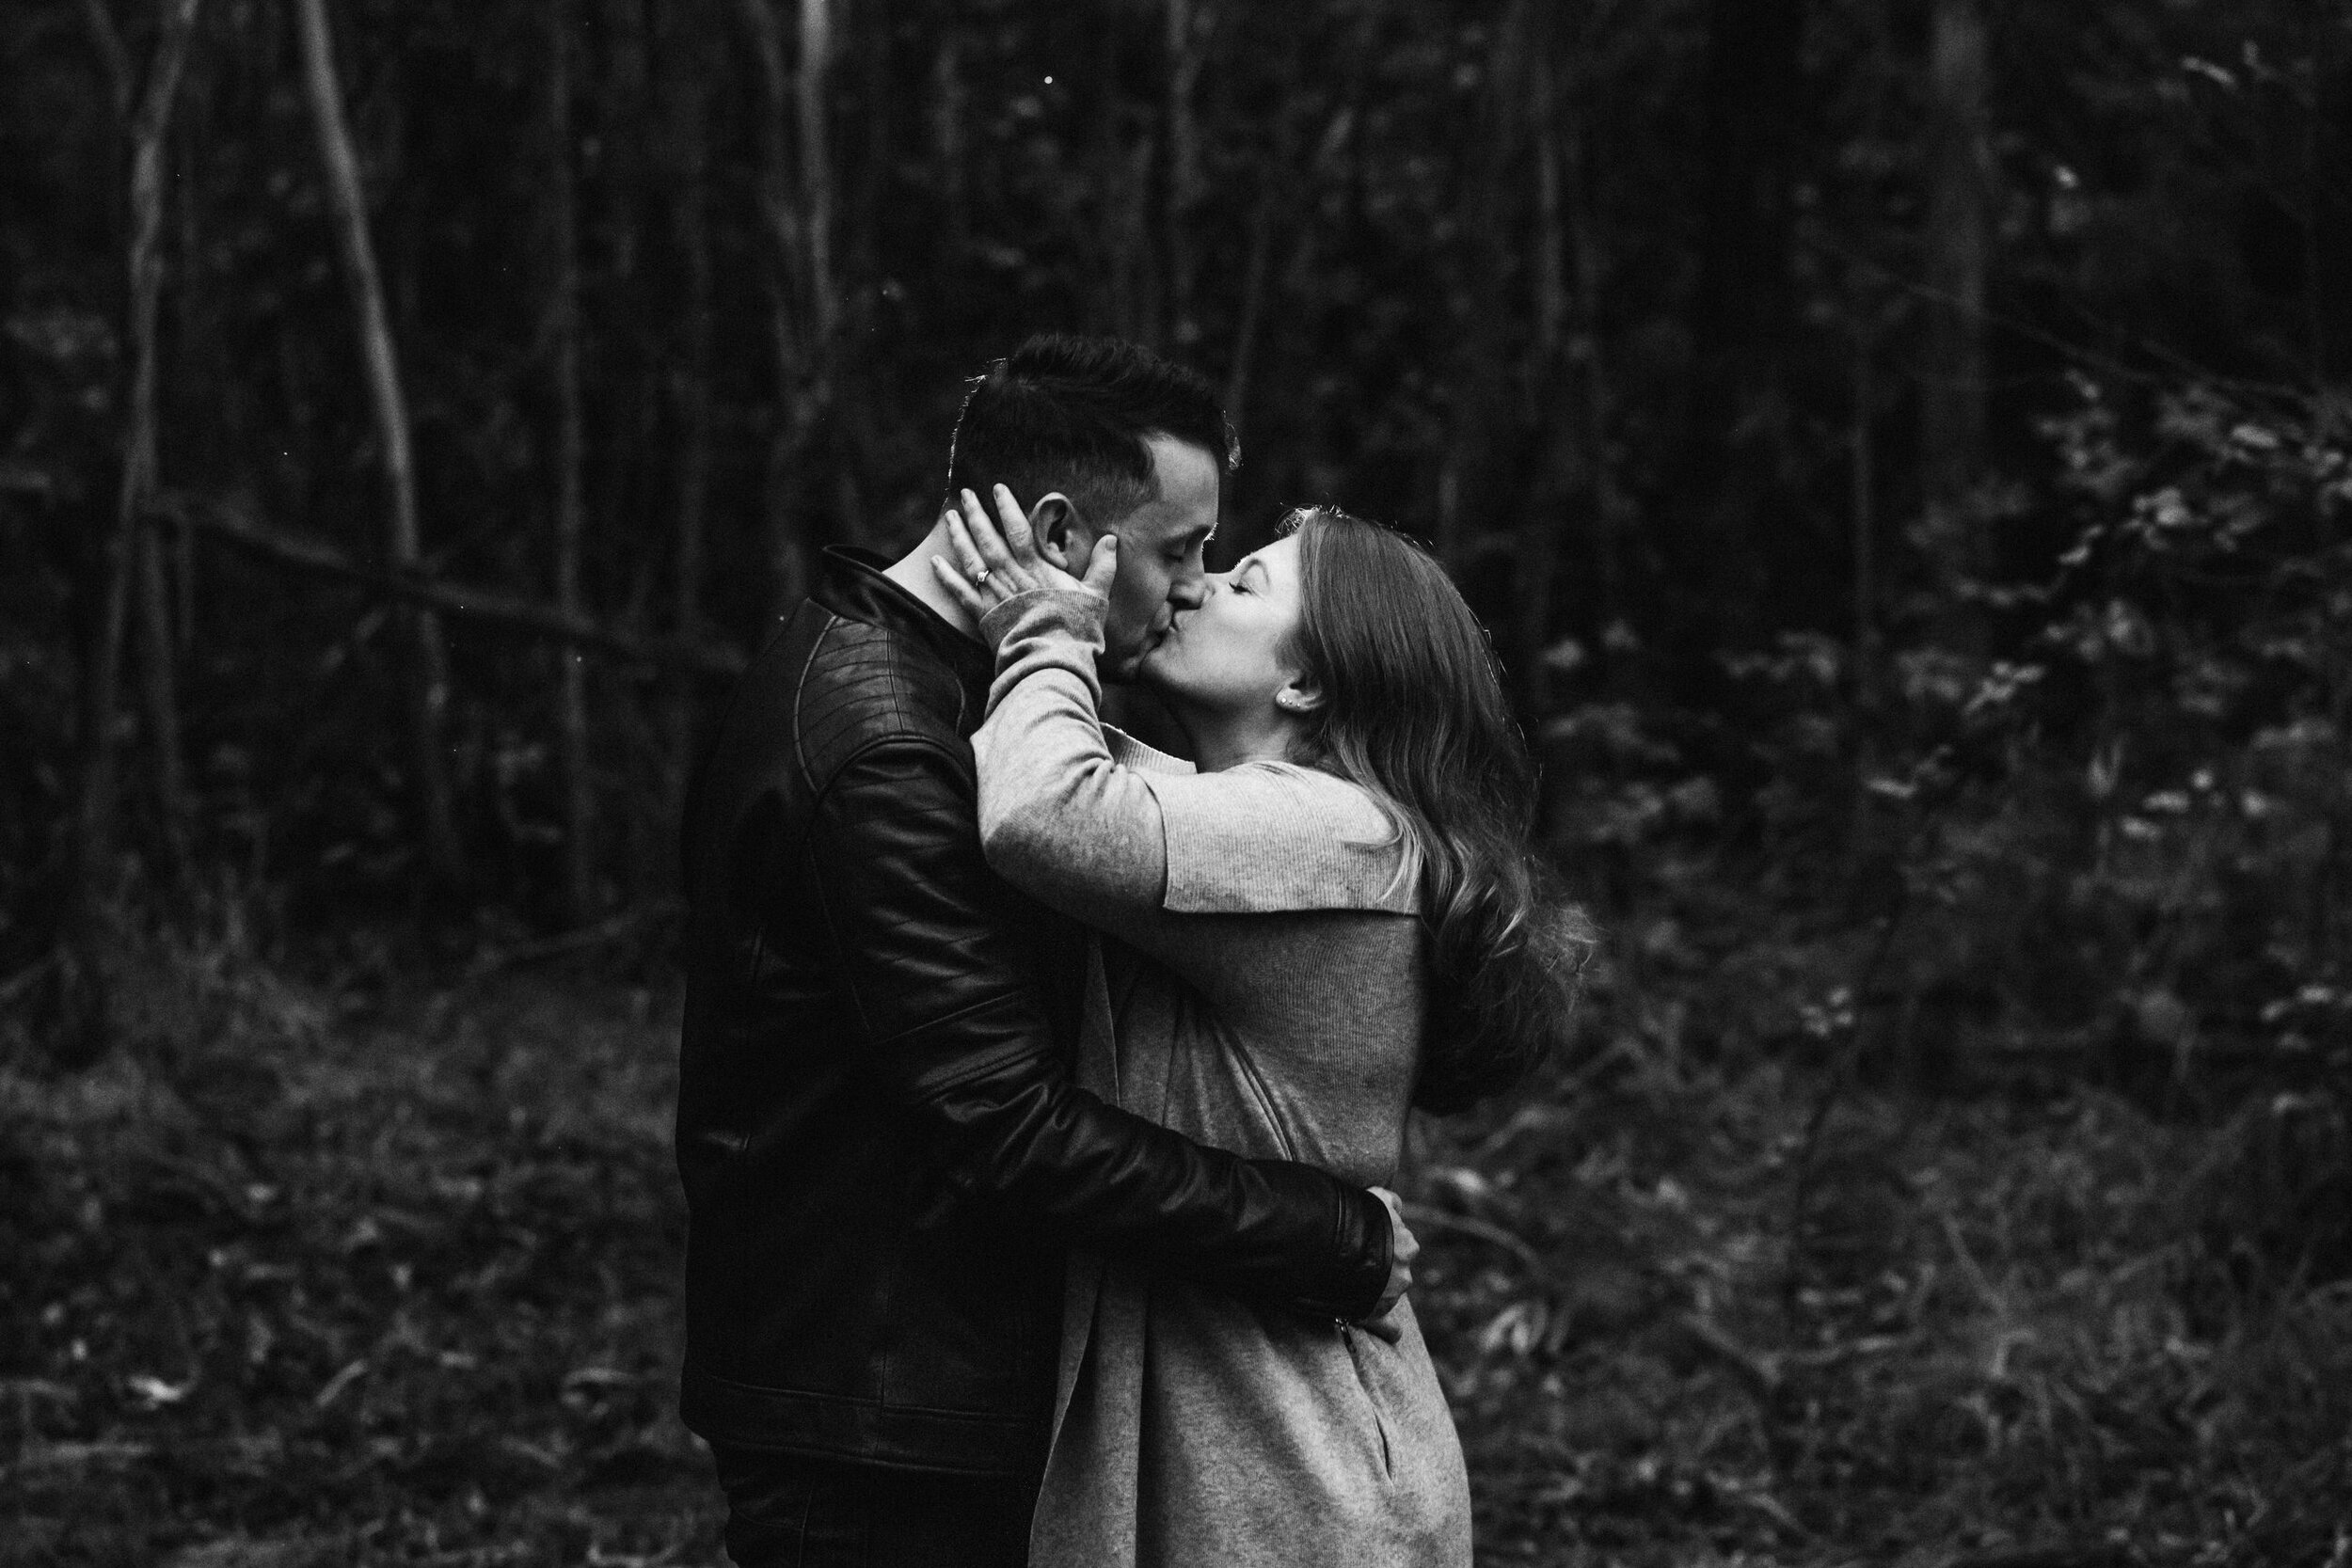 Wintery Autumn Adelaide Hills Engagement Session 23.JPG